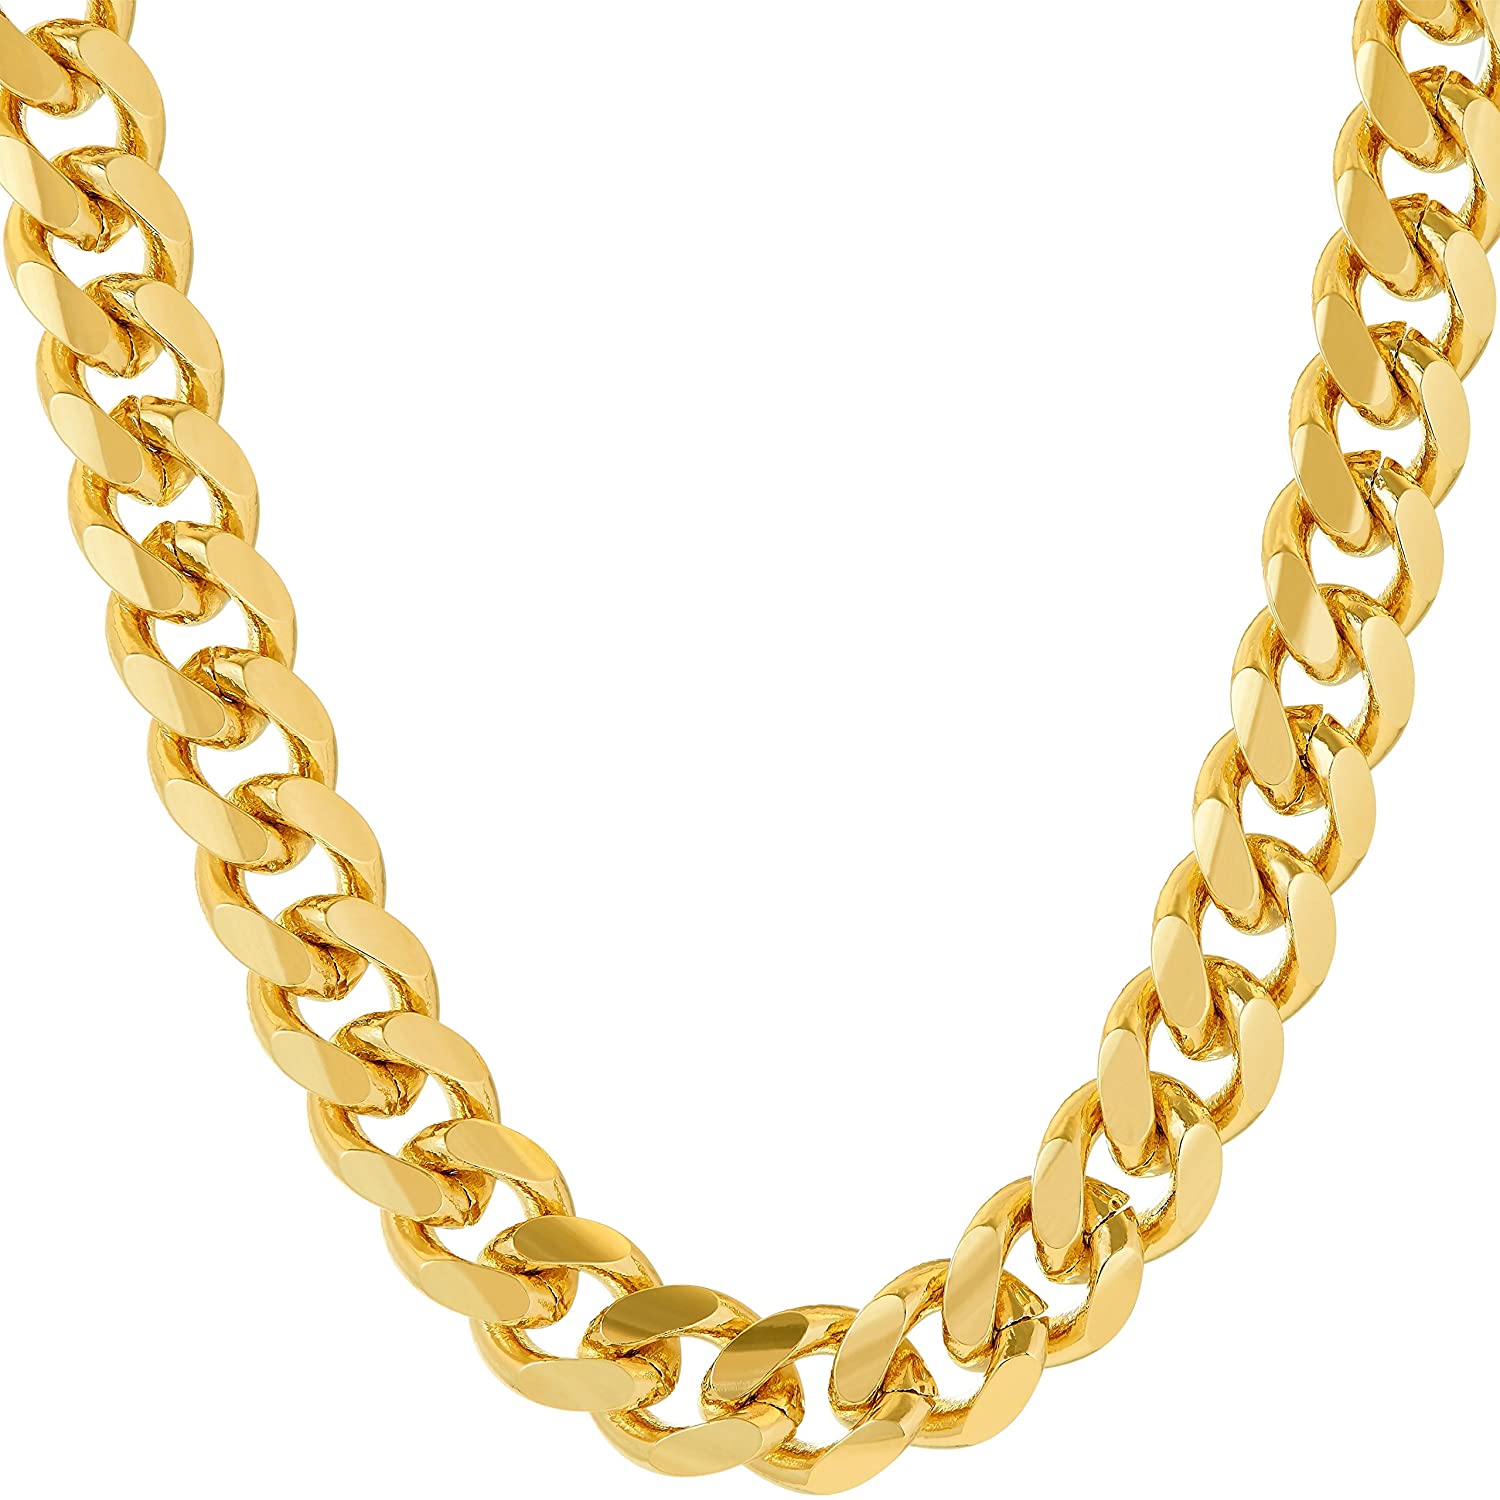 LIFETIME JEWELRY 9mm Miami Curb Cuban Link Chain Bracelet 24k Real Gold Plated